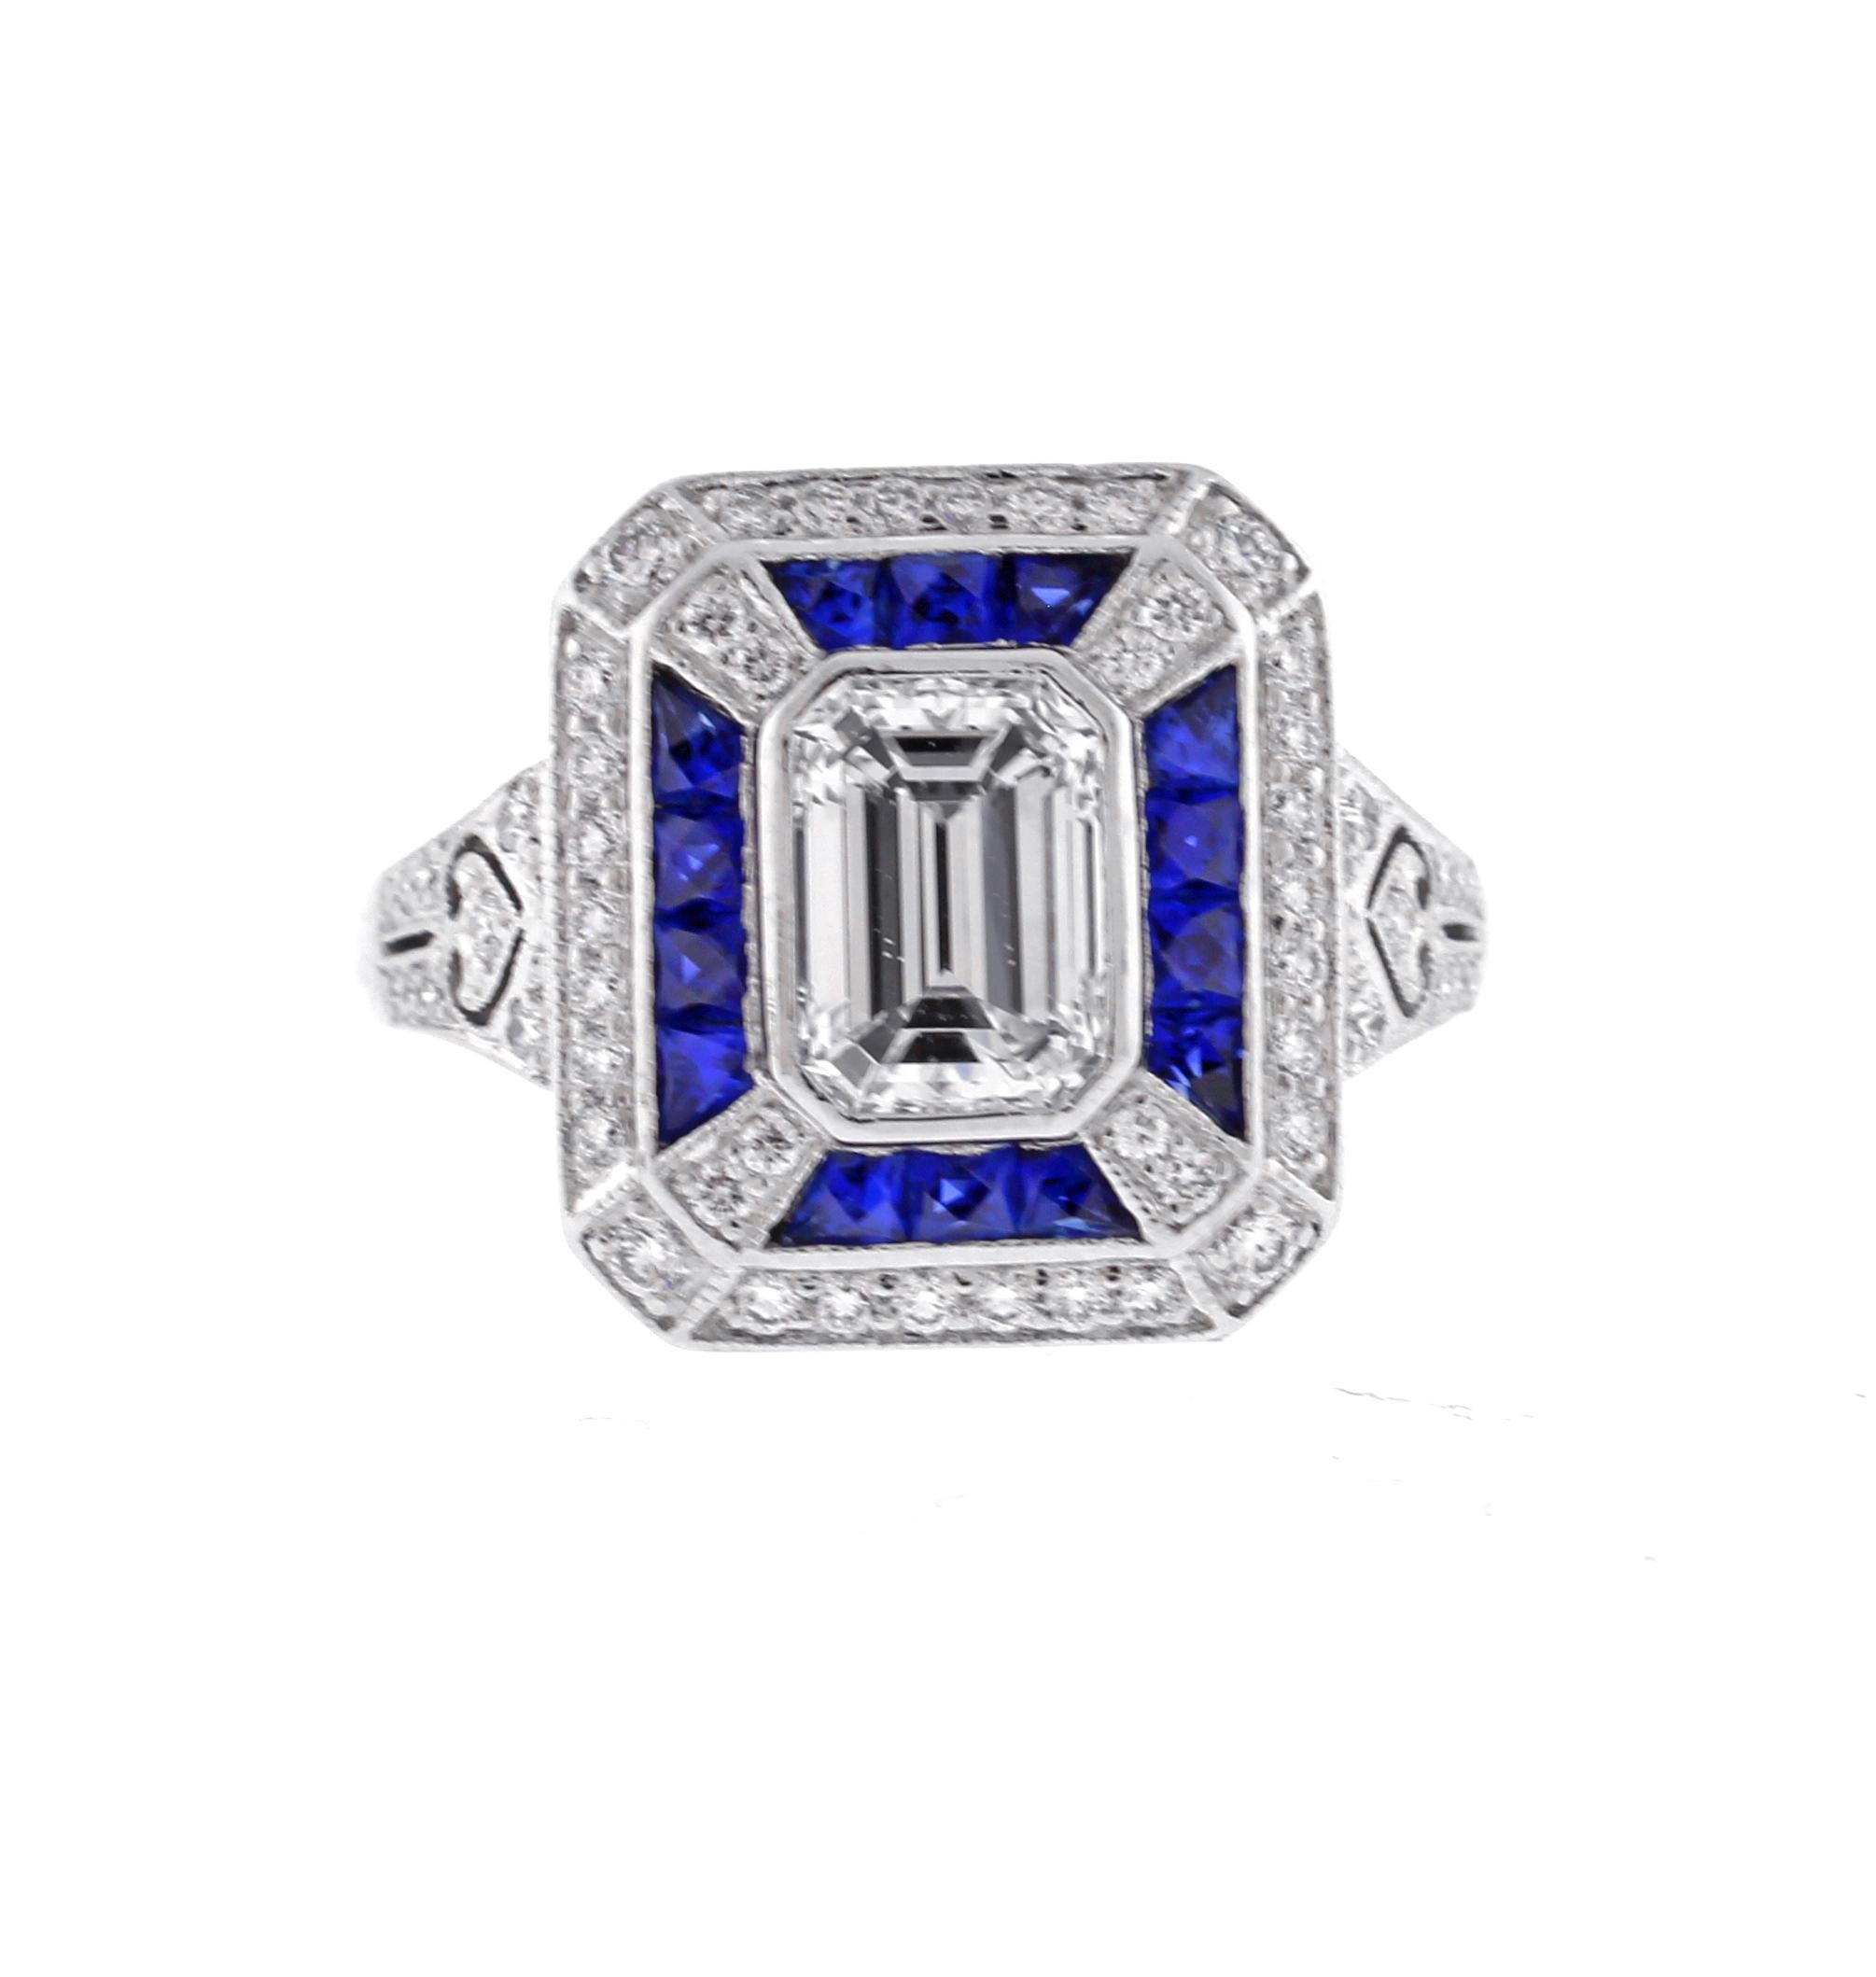 A wonderful emerald cut diamond and sapphire ring. The platinum meticulously crafted ring stays true to the art deco style with fine details and design
♦ Metal: platinum
♦ Circa 2010
♦ Emerald cut diamond  weighs approxemently 1.30 carats, I color